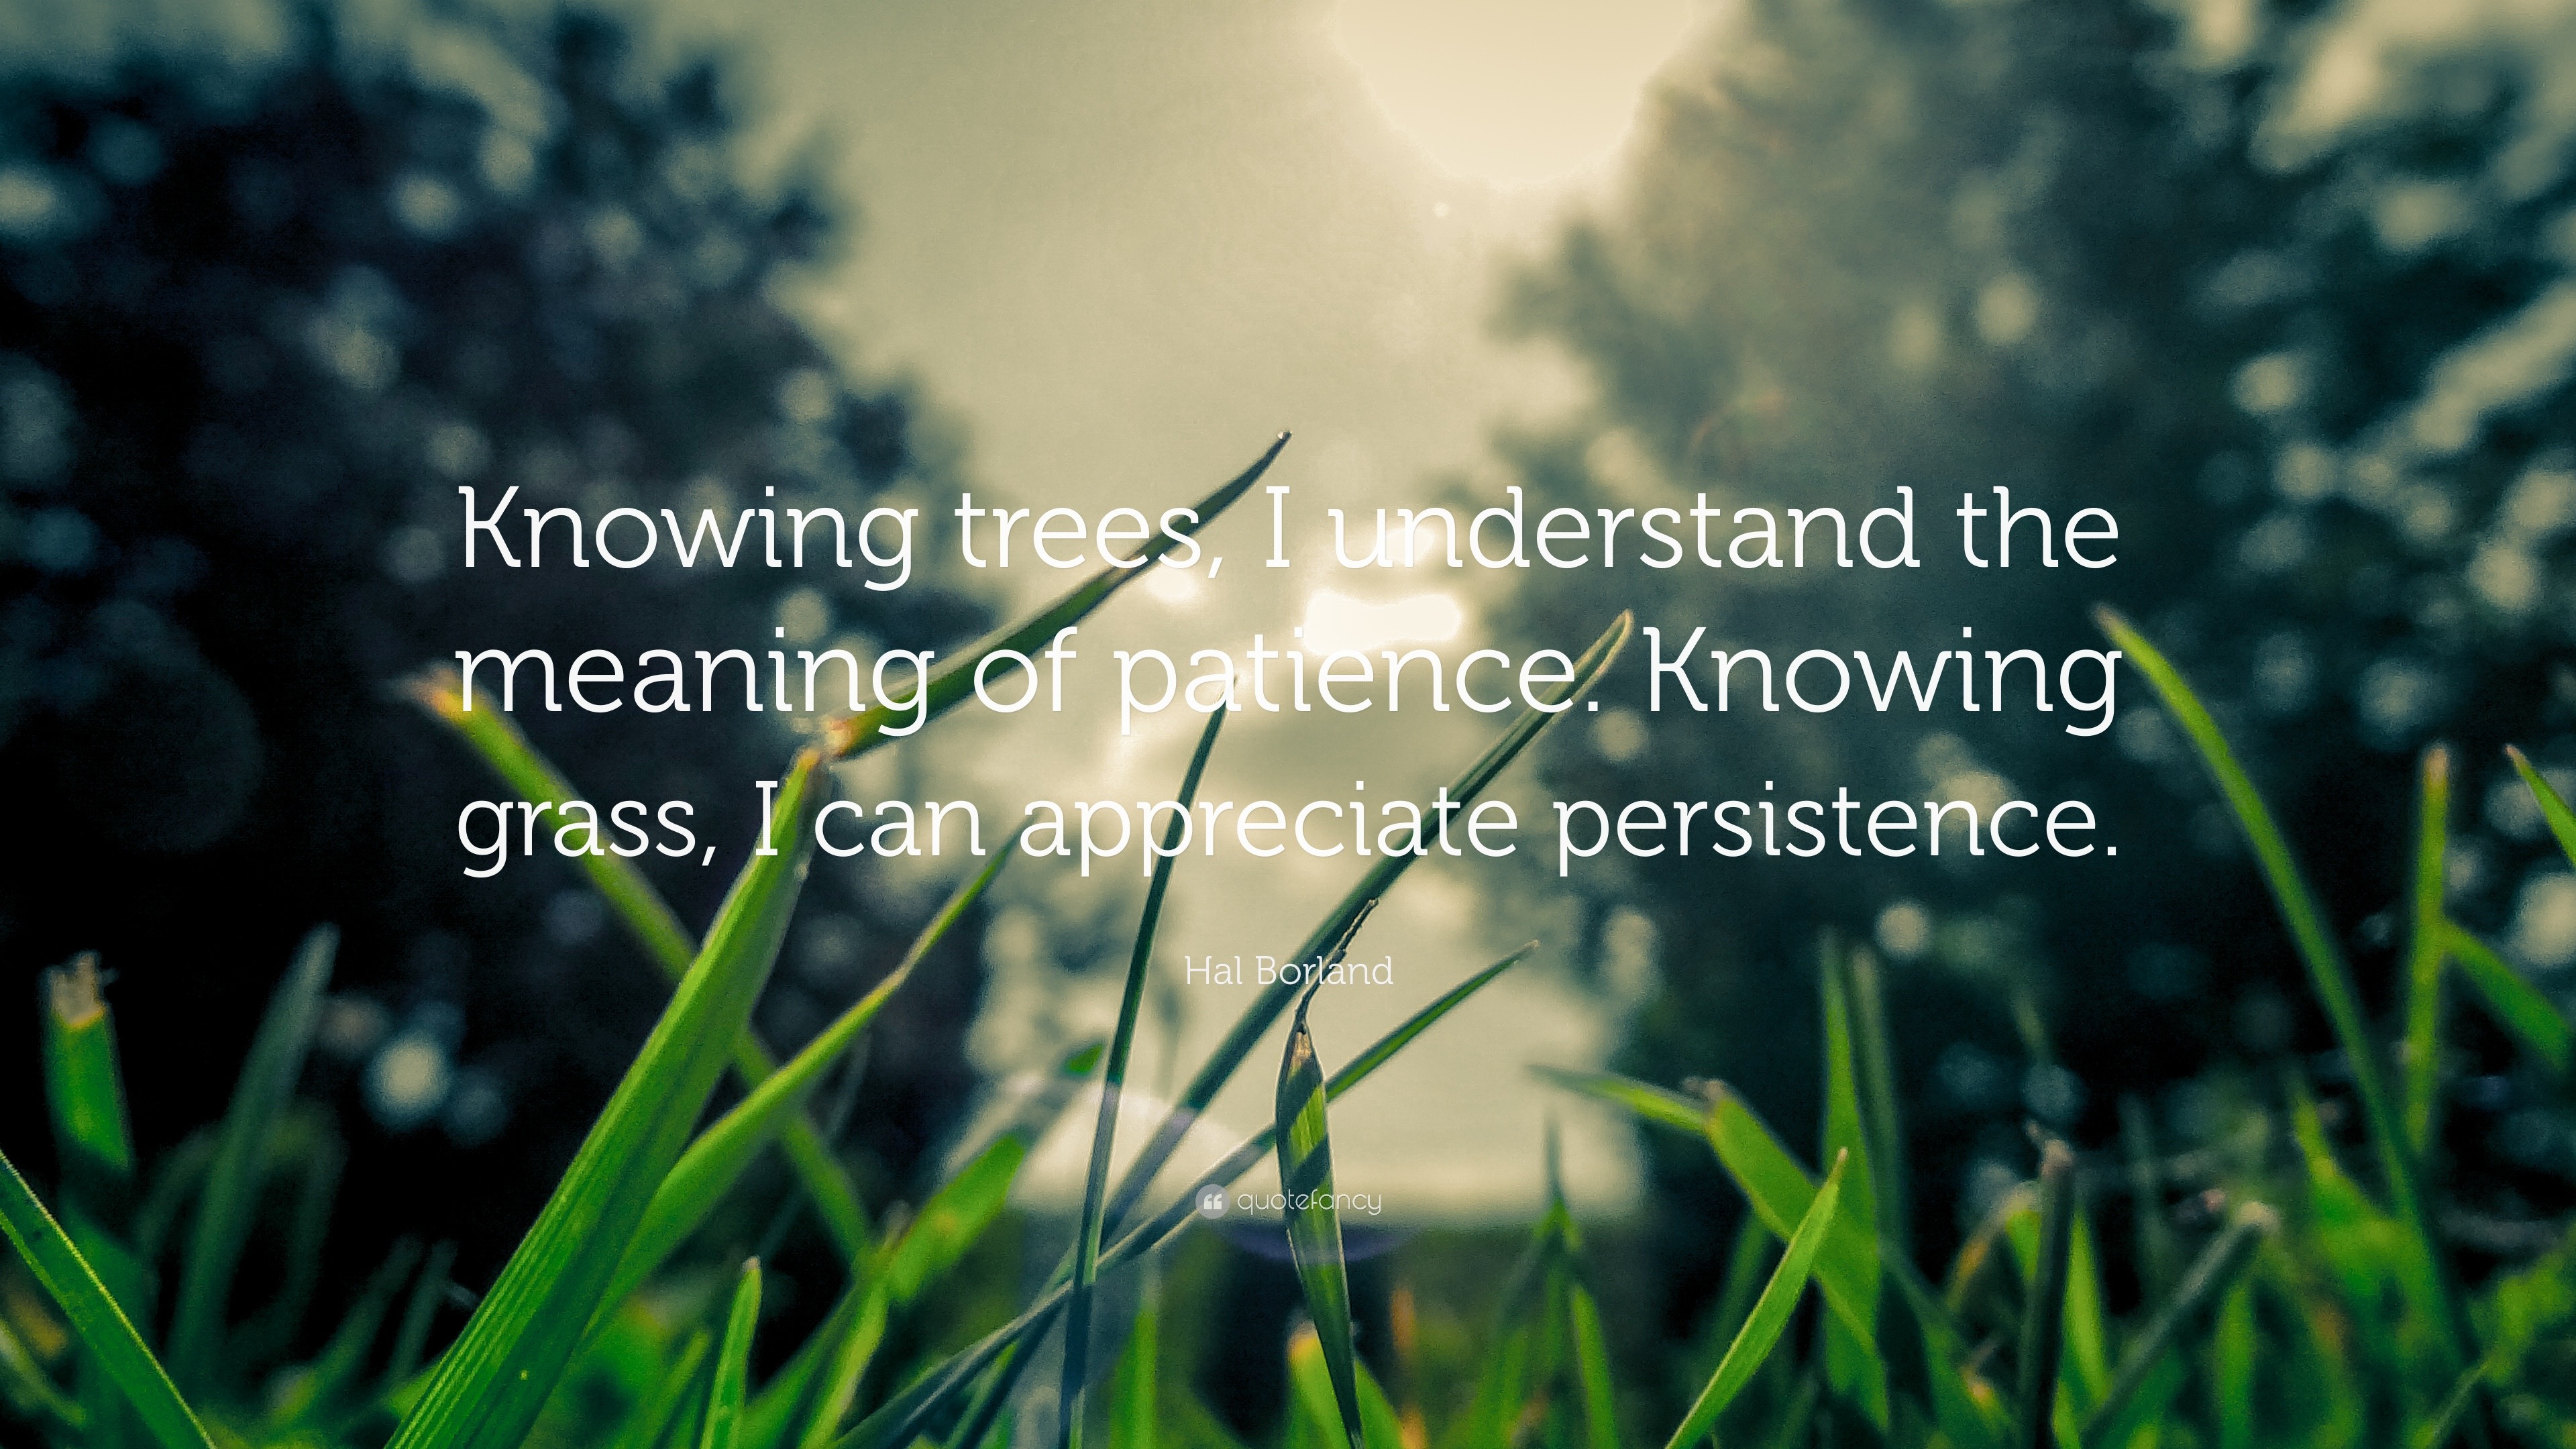 Hal Borland Quote: “Knowing trees, I understand the meaning of patience